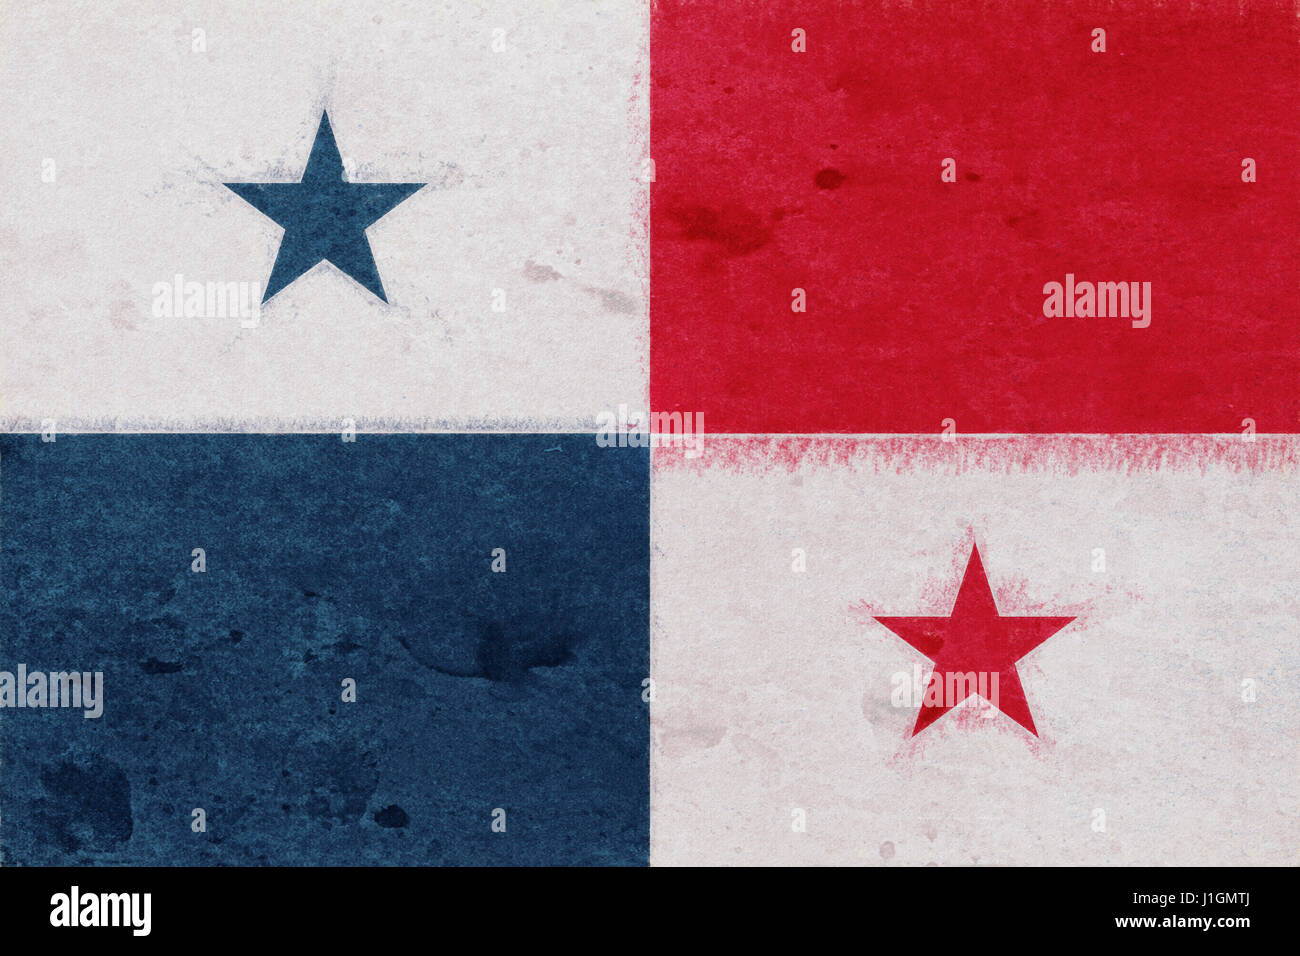 Illustration of the flag of Panama with a gunge texture Stock Photo